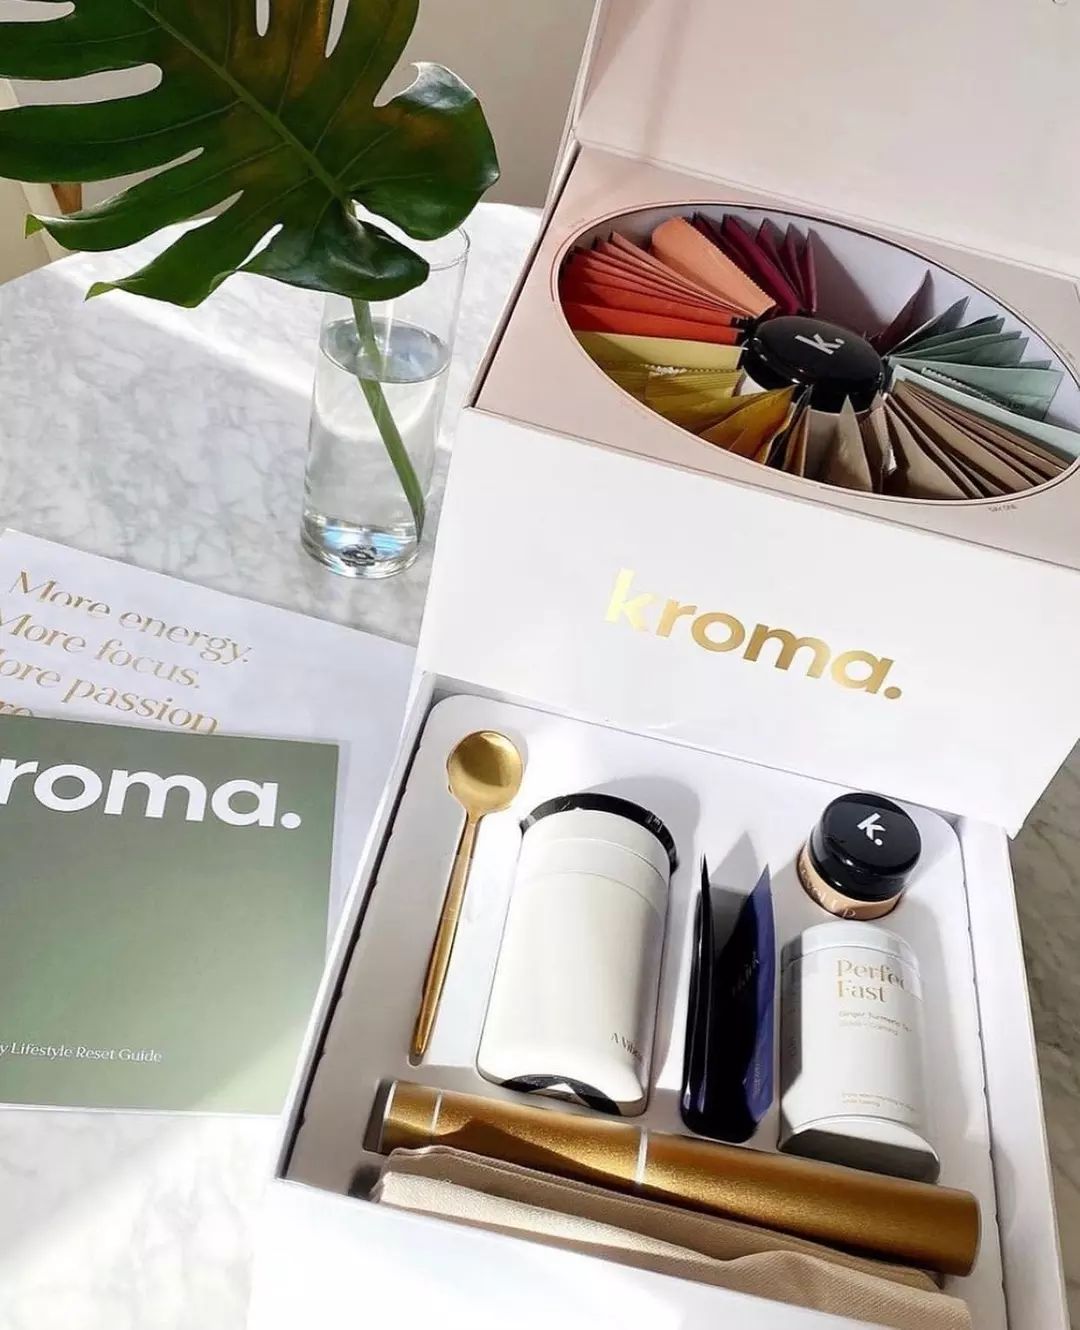 Kroma 5 Day Reset Cleanser